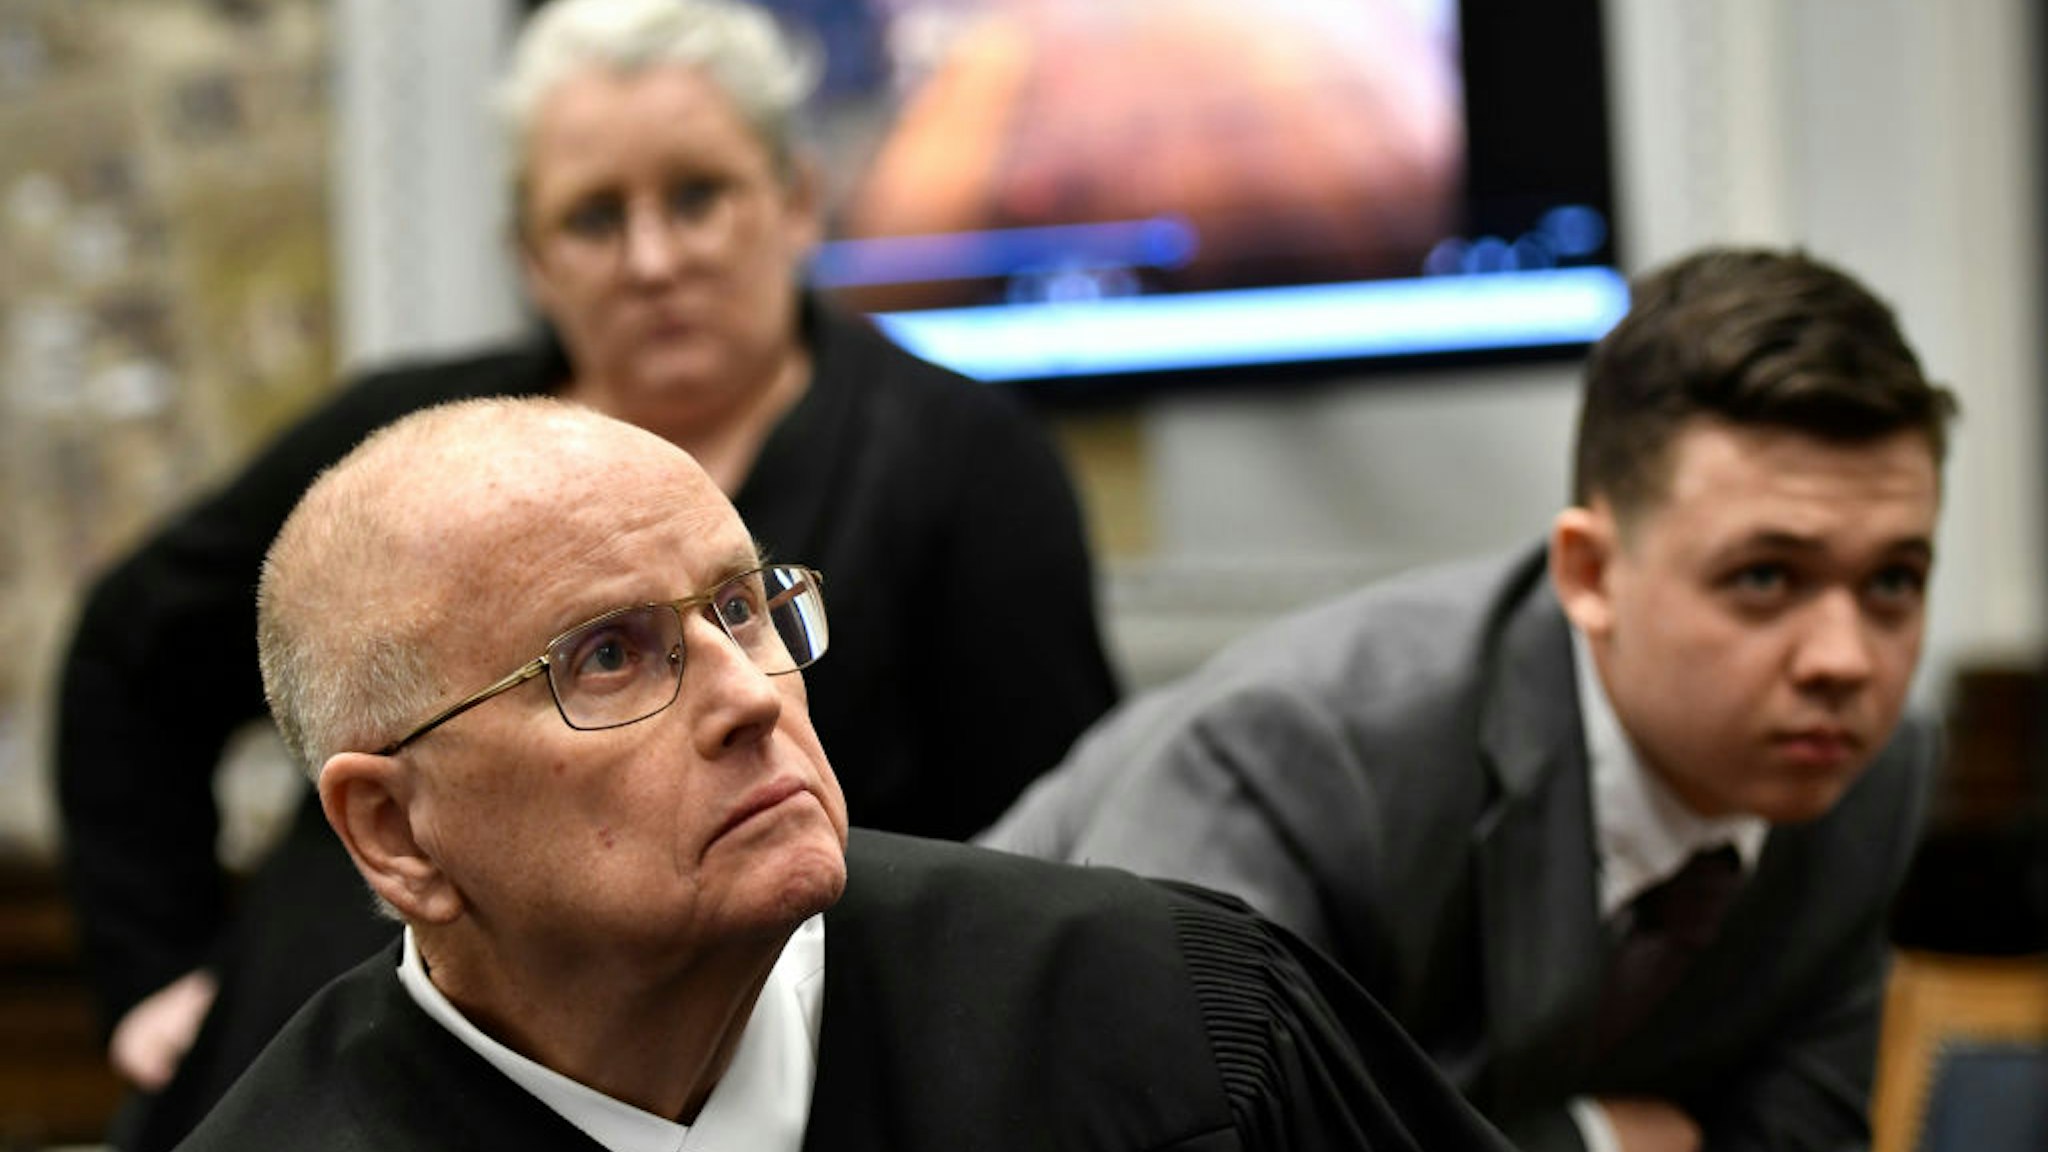 Judge Bruce Schroeder, front, comes down from the bench and sits closer to a 4k television screen to watch a video as Kyle Rittenhouse, right, and his attorney Natalie Wisco stand behind him during proceedings at the Kenosha County Courthouse on November 12, 2021 in Kenosha, Wisconsin.